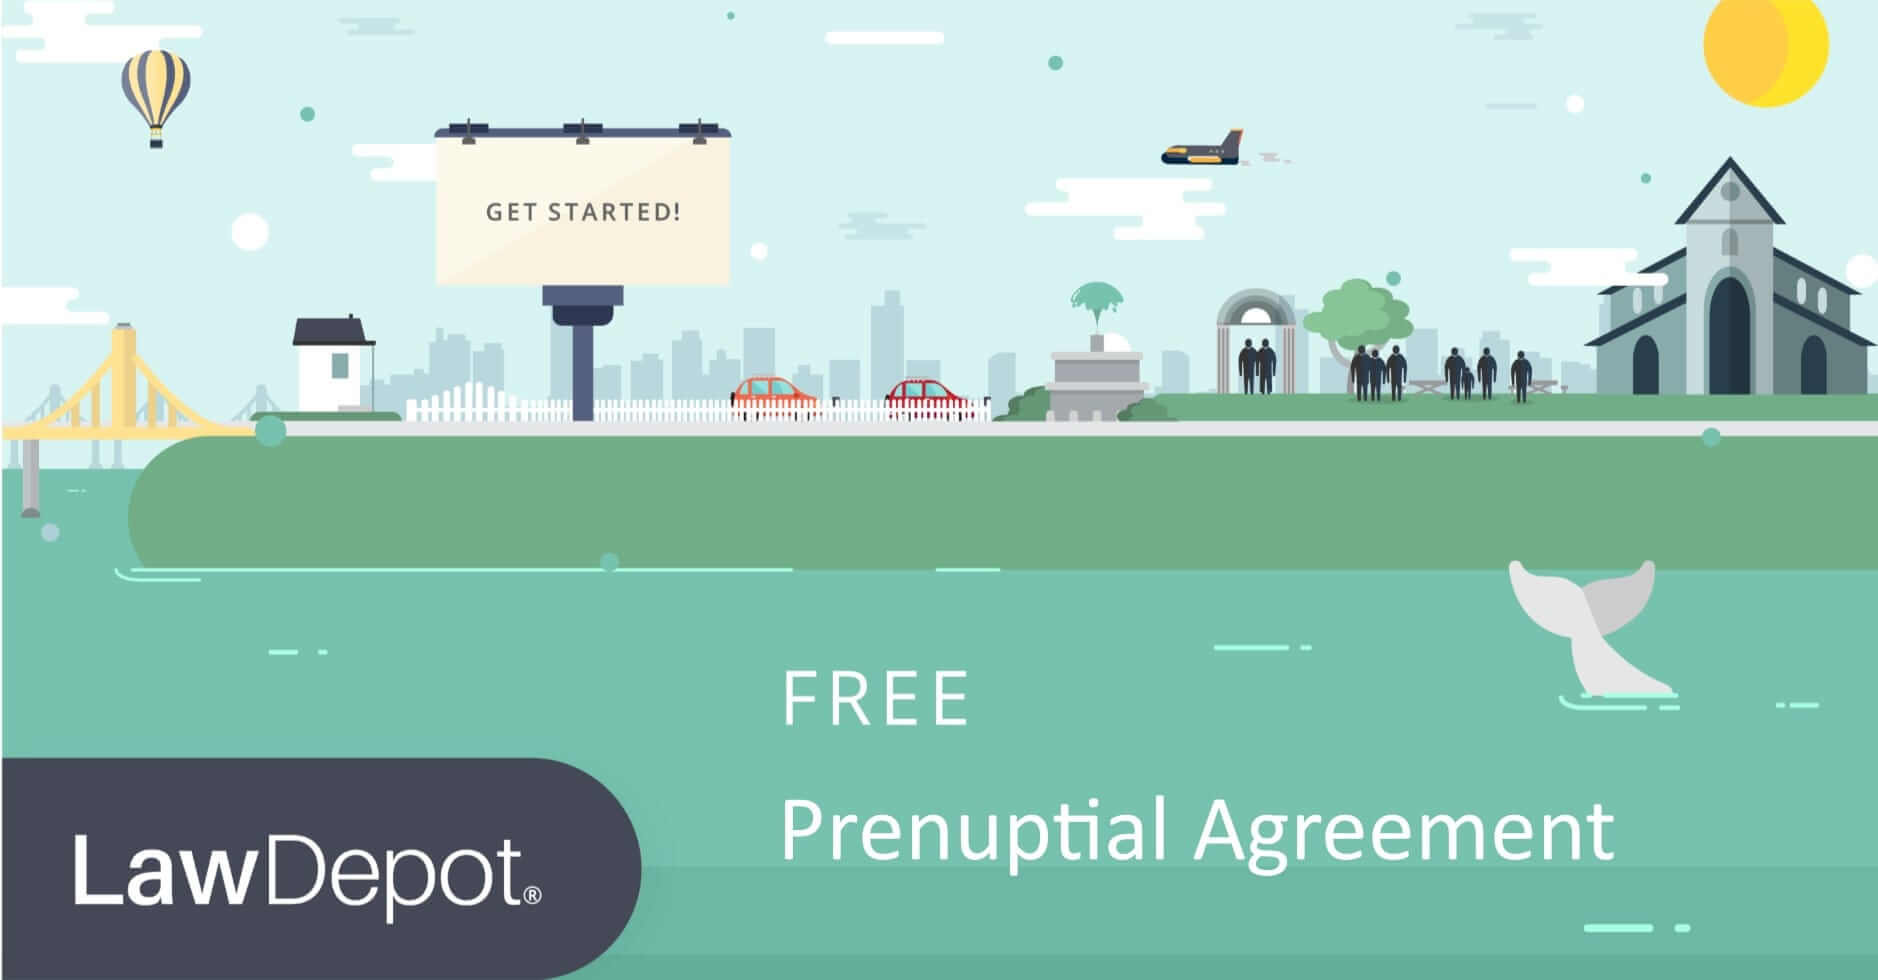 Free Prenuptial Agreement - Create, Download, and Print  LawDepot With new york prenuptial agreement template